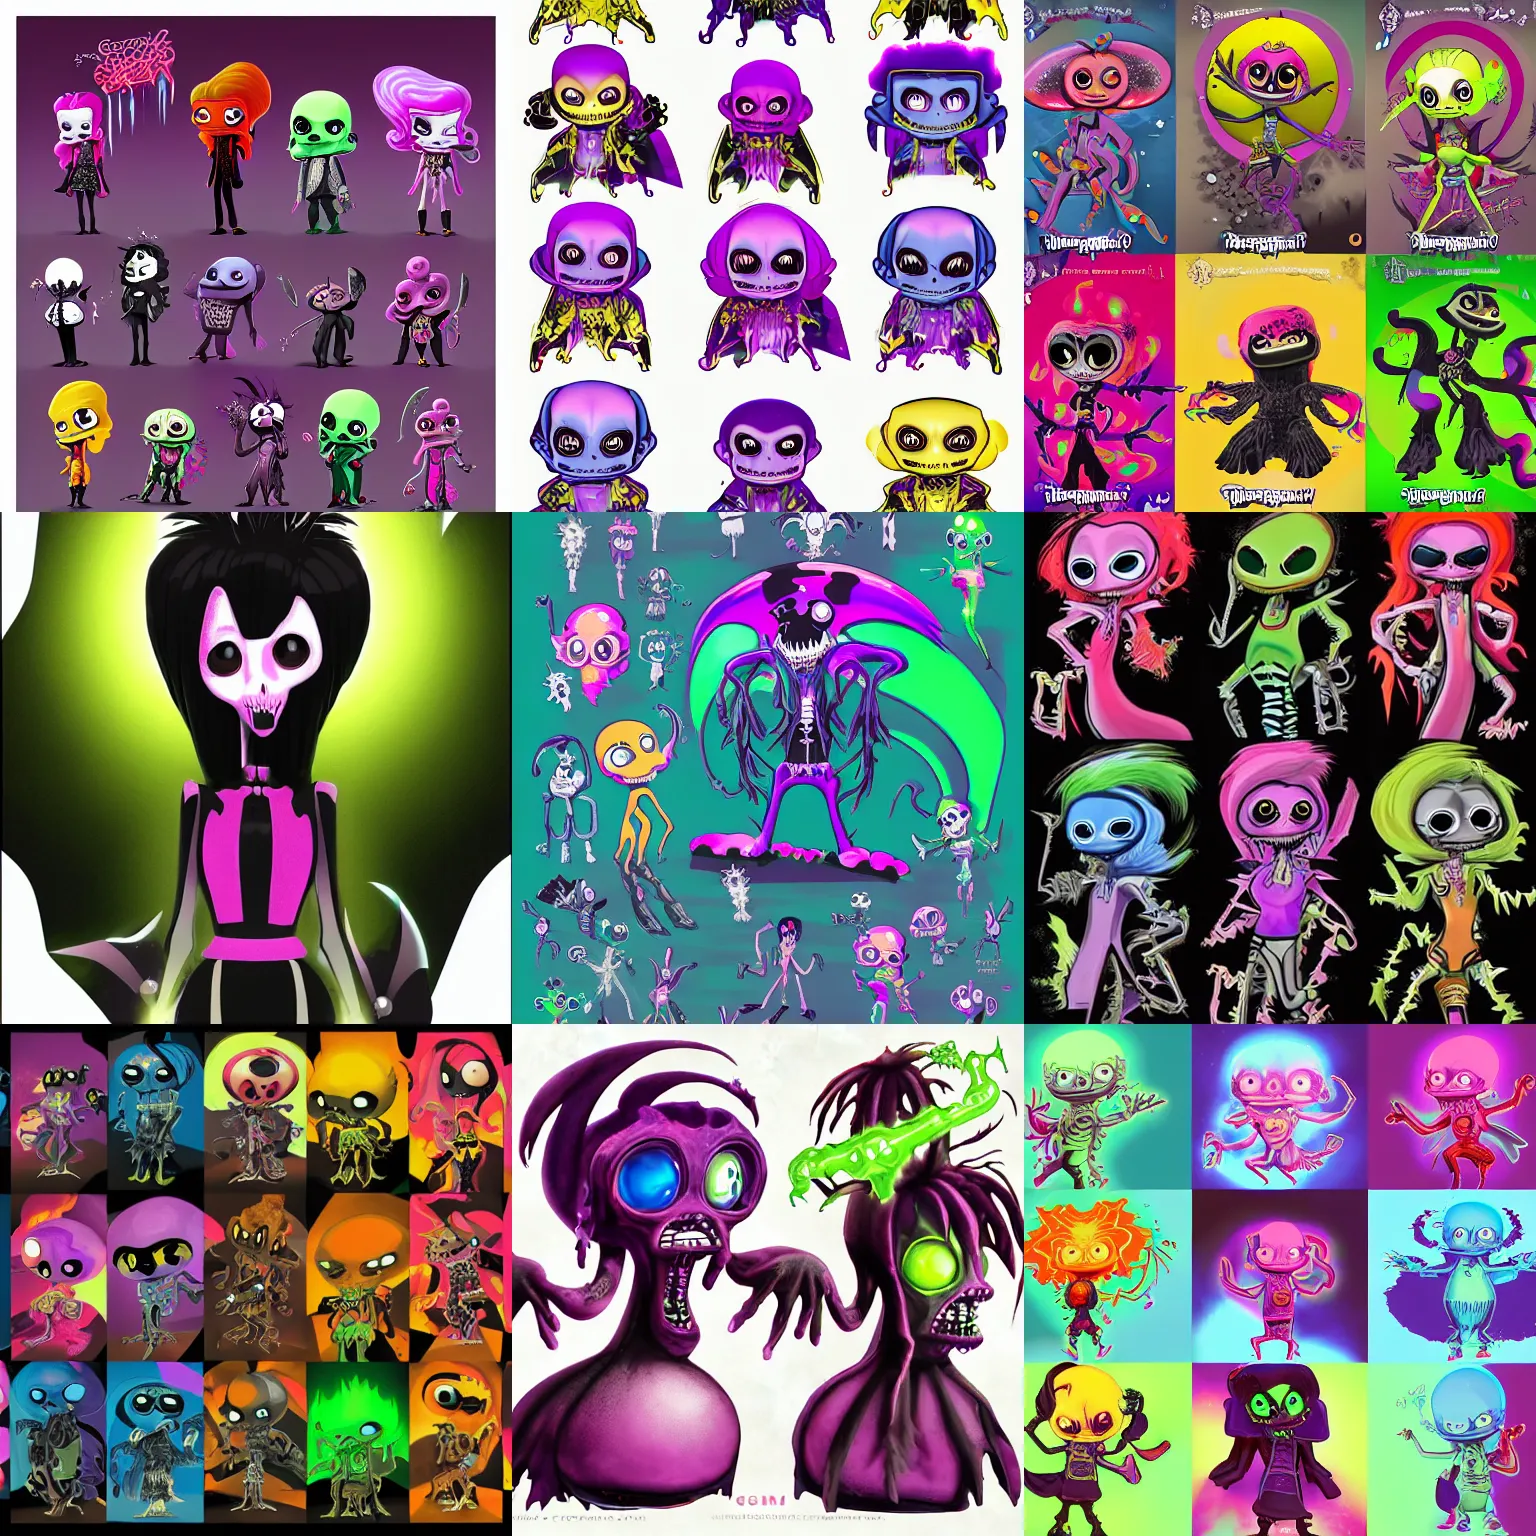 Prompt: CGI umbrakinetic lisa frank gothic punk toxic glow in the dark bones vampiric rockstar vampire squid concept character designs of various shapes and sizes by genndy tartakovsky and the creators of fret nice at pieces interactive and splatoon by nintendo and the psychonauts by doublefines tim shafer artists for the new hotel transylvania film managed by pixar and overseen by Jamie Hewlett from gorillaz